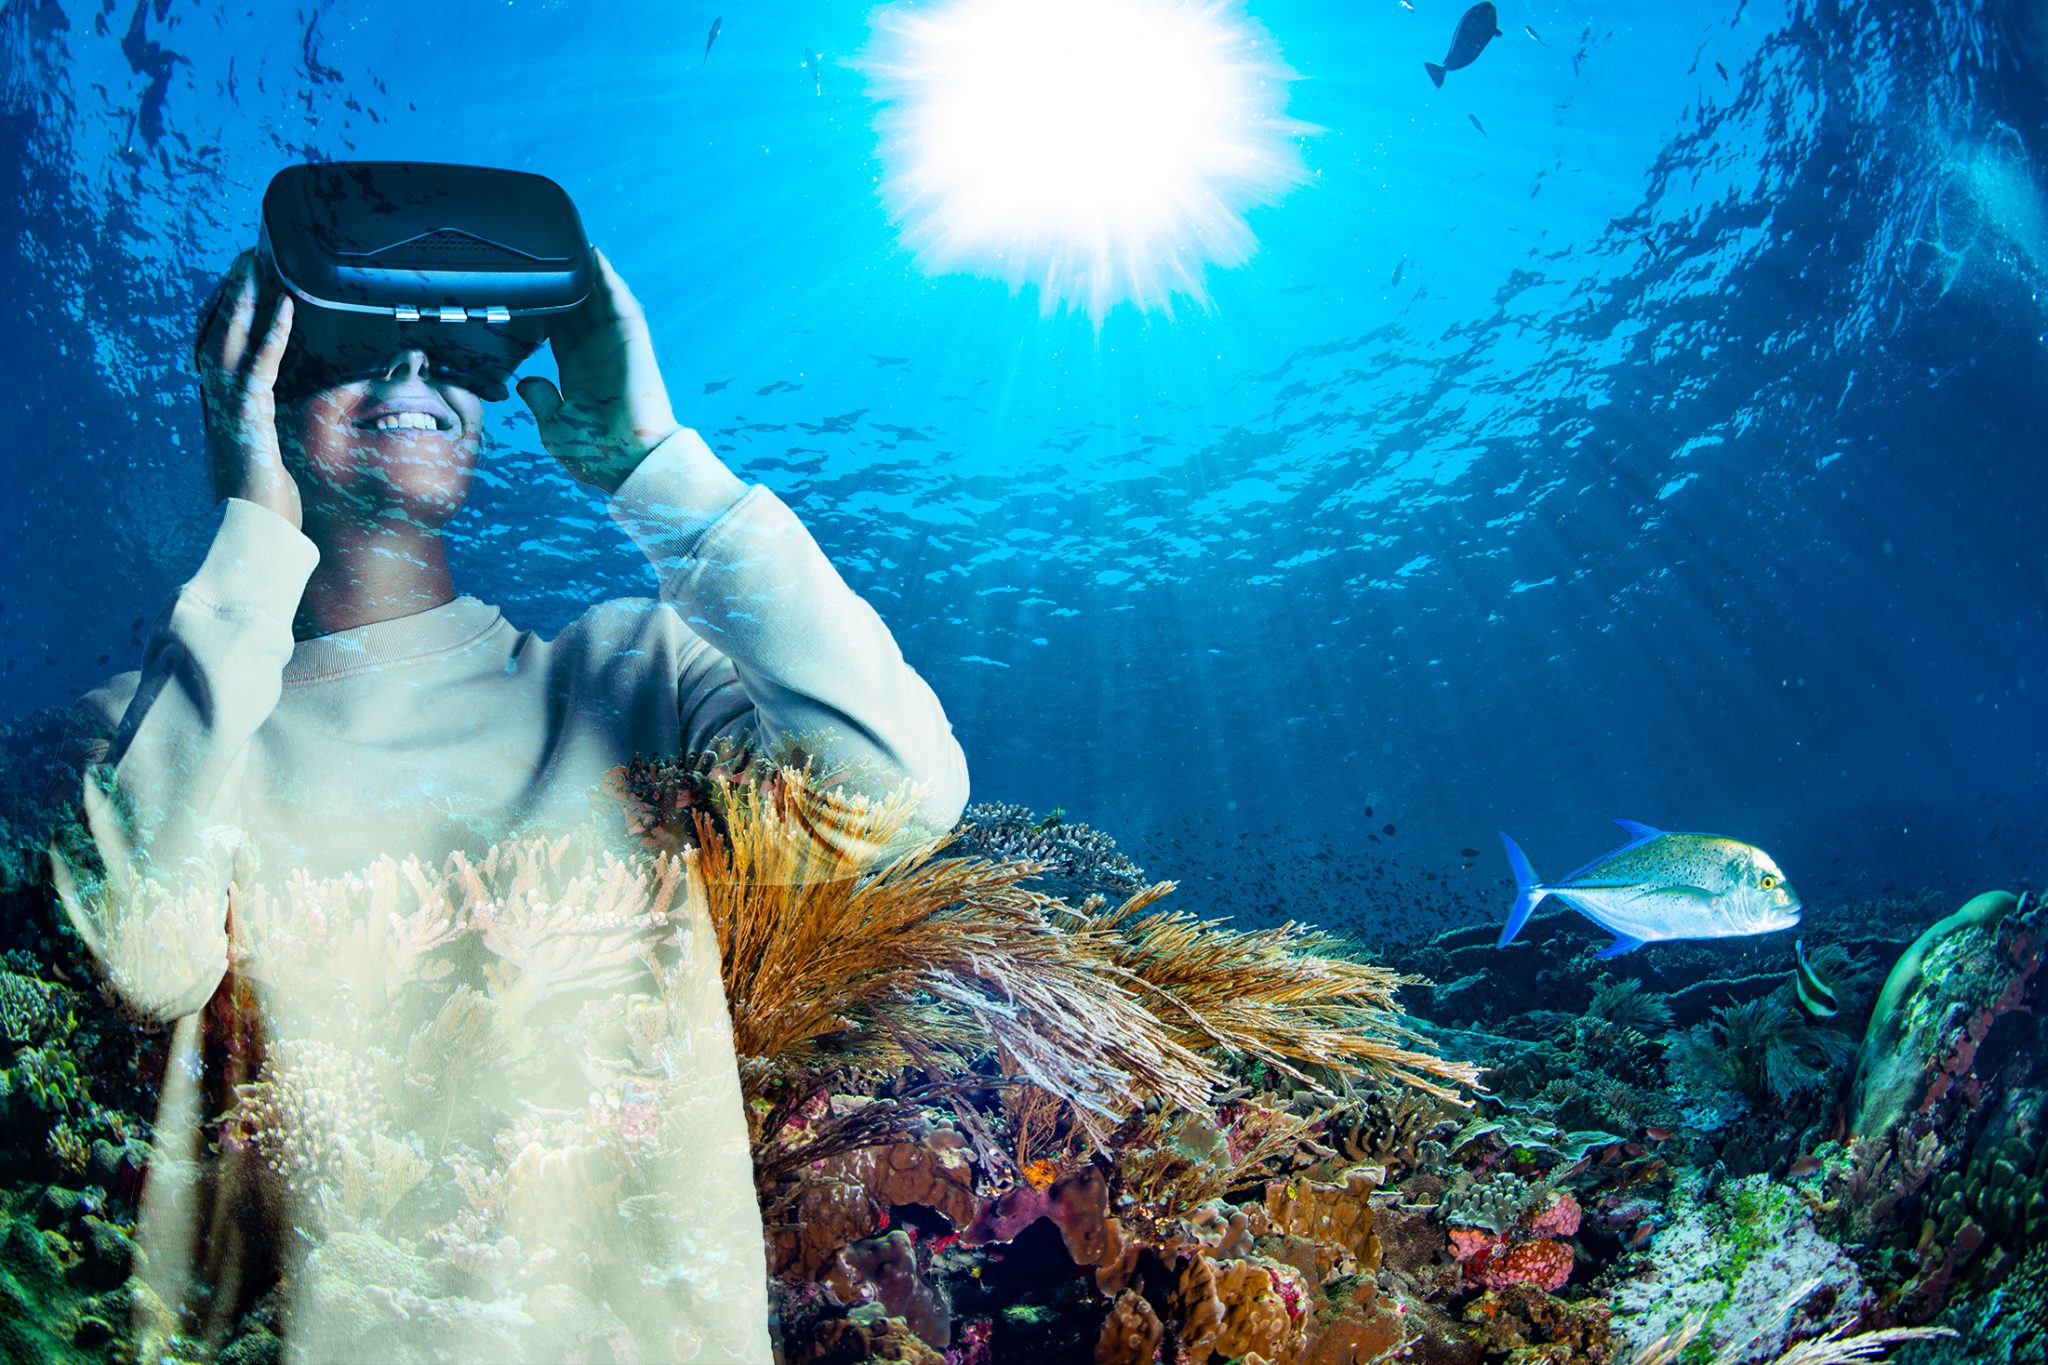 A diver enjoying a virtual reality scuba dive which is one way how to get over a fear of scuba diving in exposure therapy